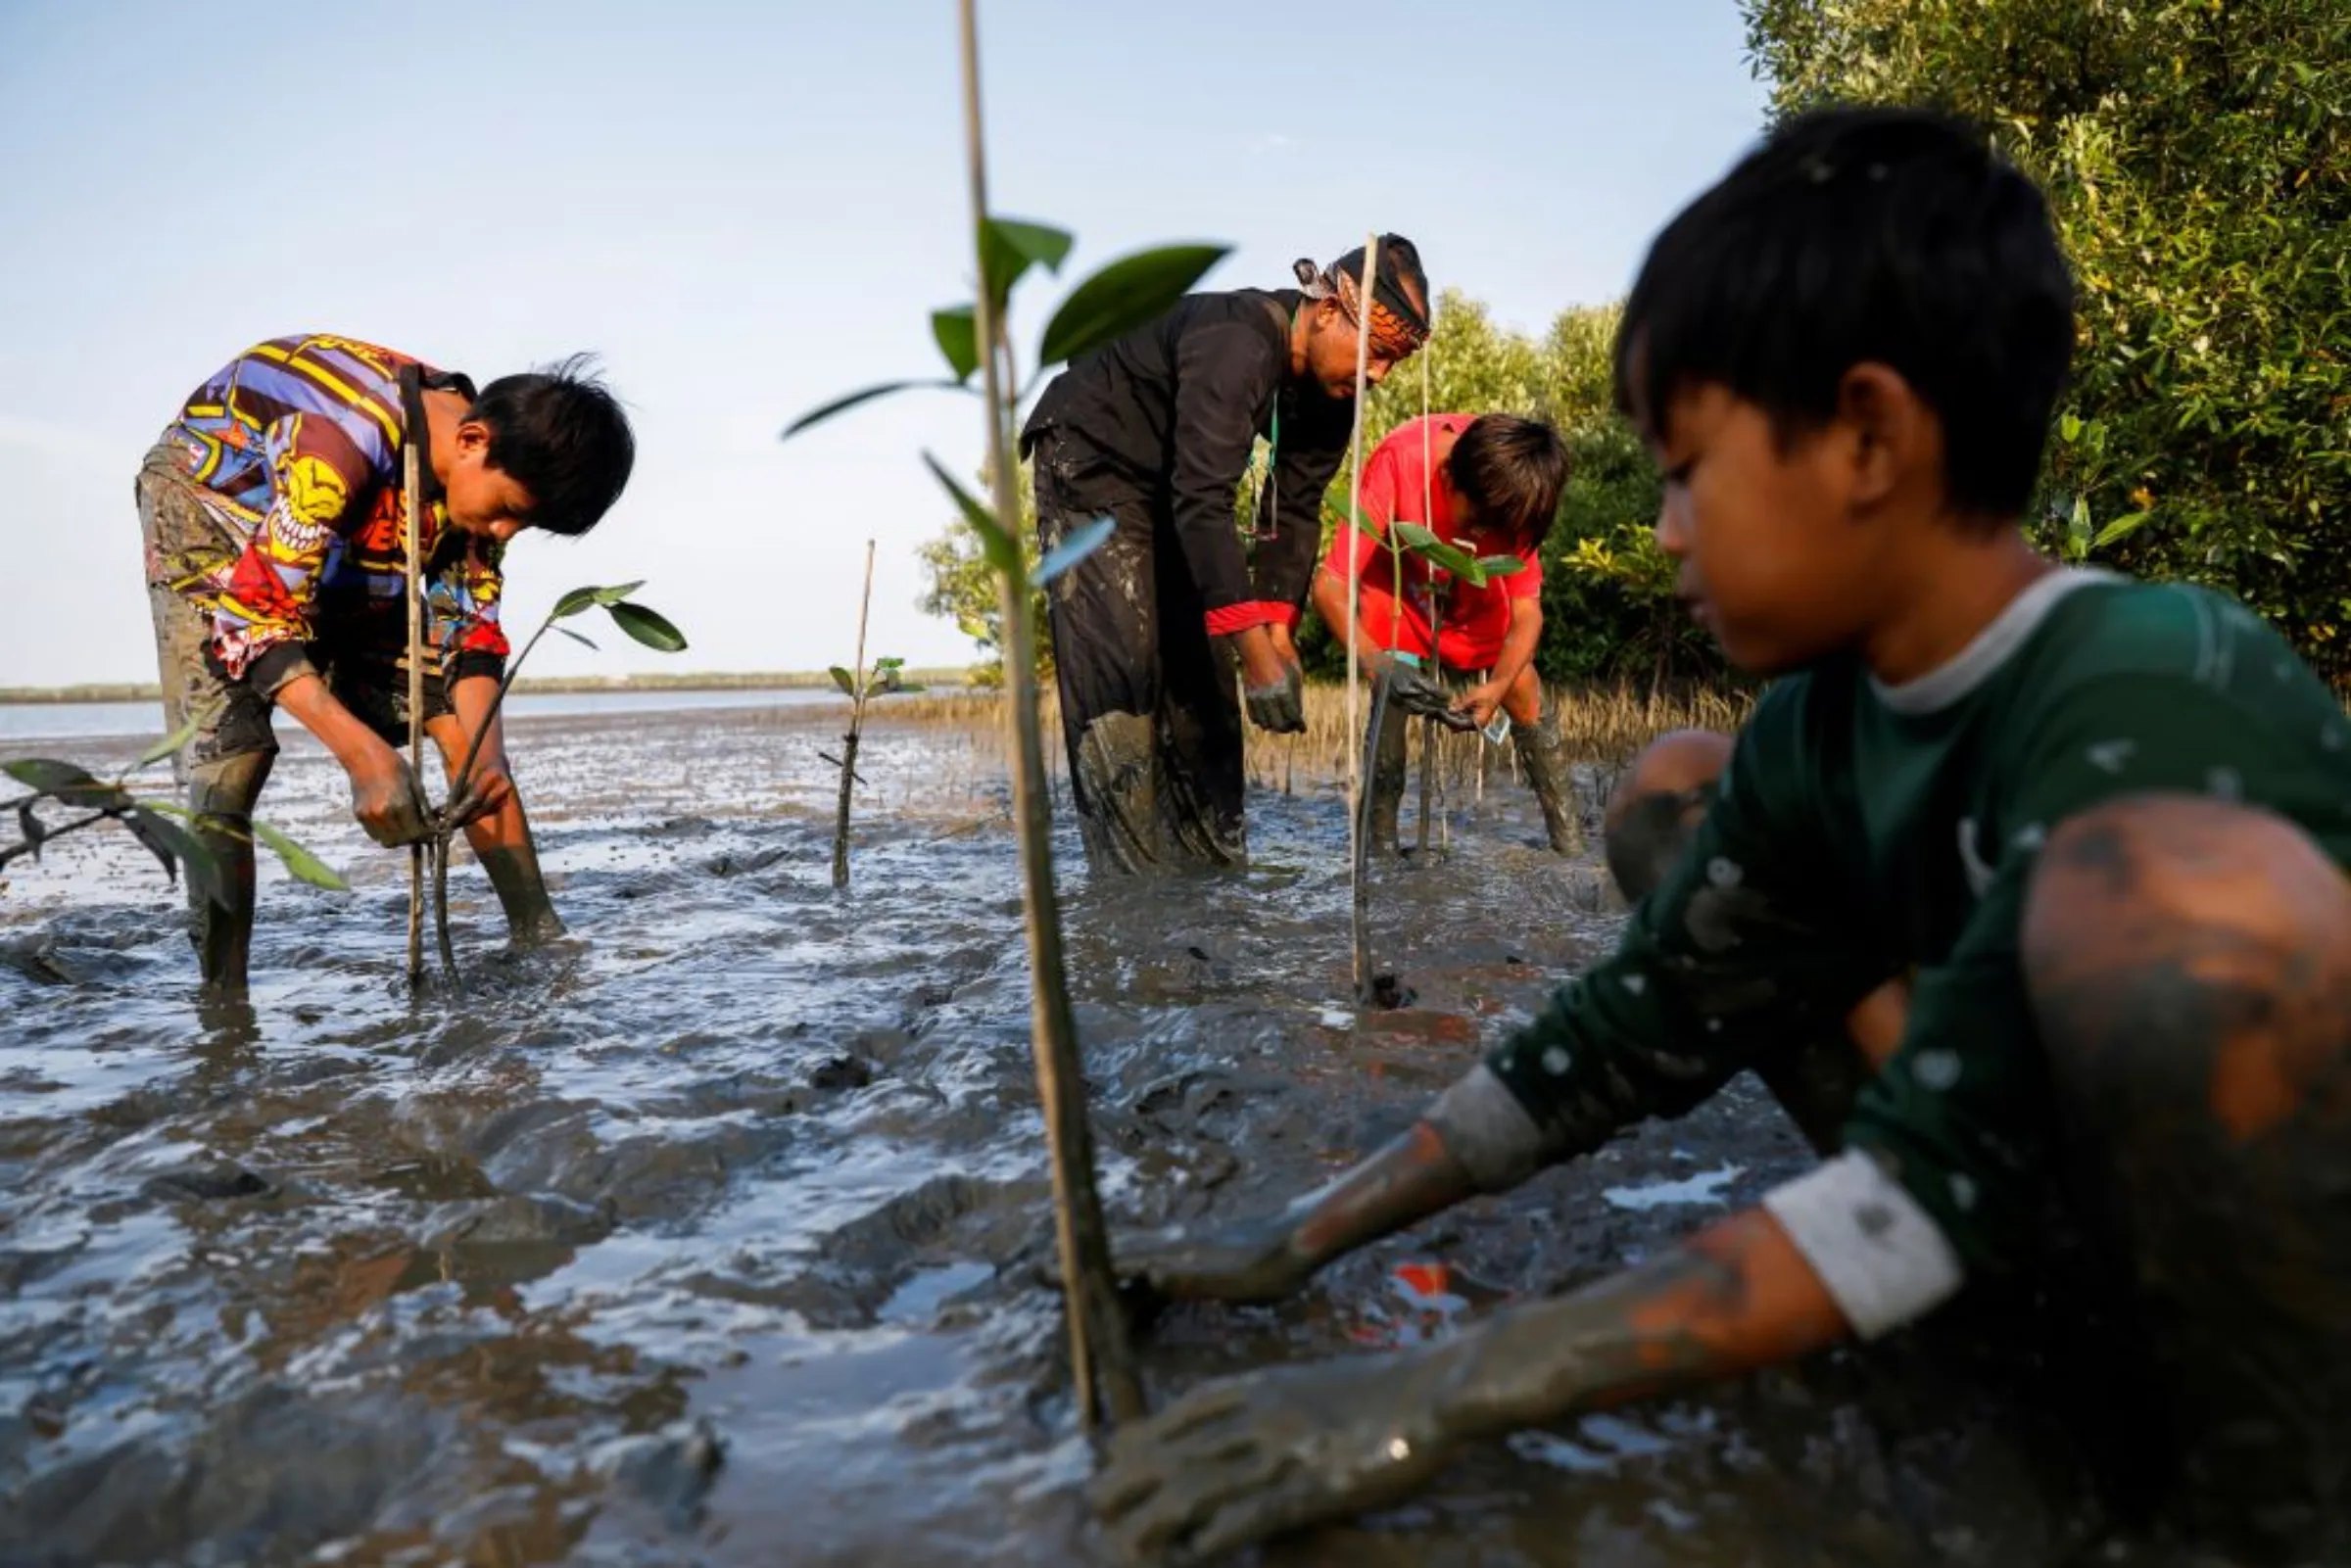 A man plants mangrove trees with local children at Tiris beach in Pabeanilir village, Indramayu regency, West Java province, Indonesia, March 11, 2021. Picture taken March 11, 2021. REUTERS/Willy Kurniawan